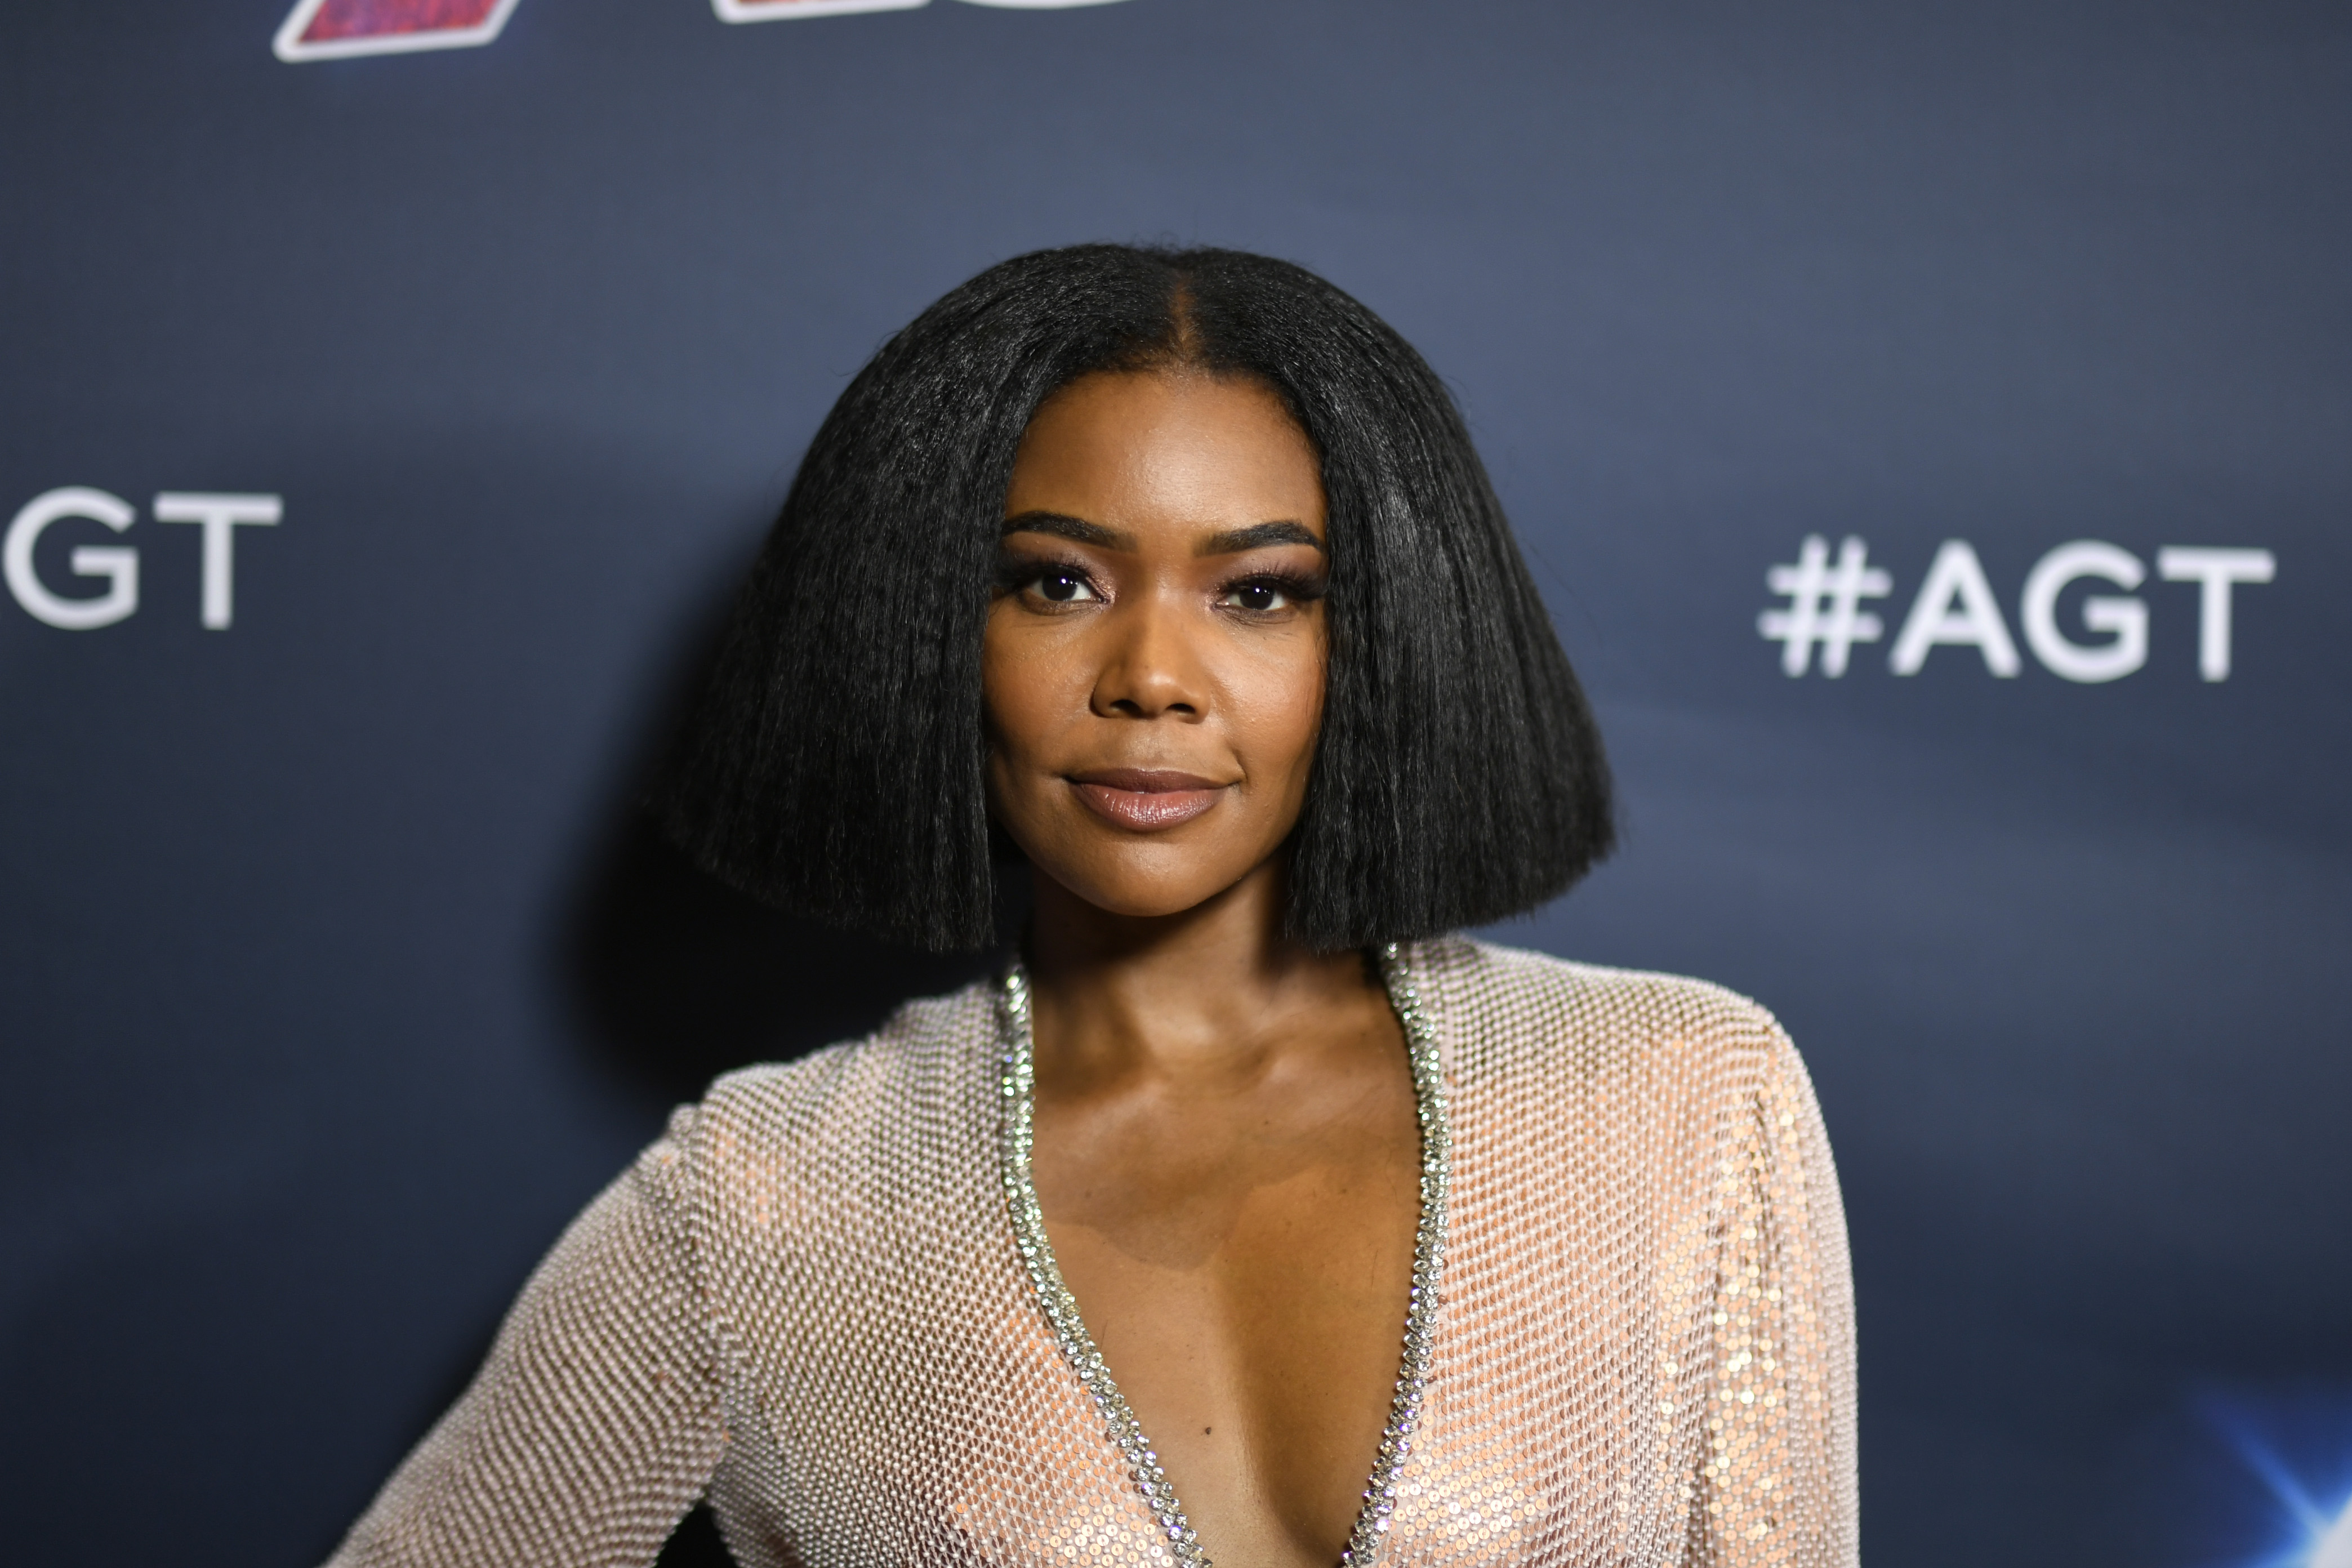 Gabrielle Union Speaks On “Toxic” Work Environment At “America’s Got Talent”